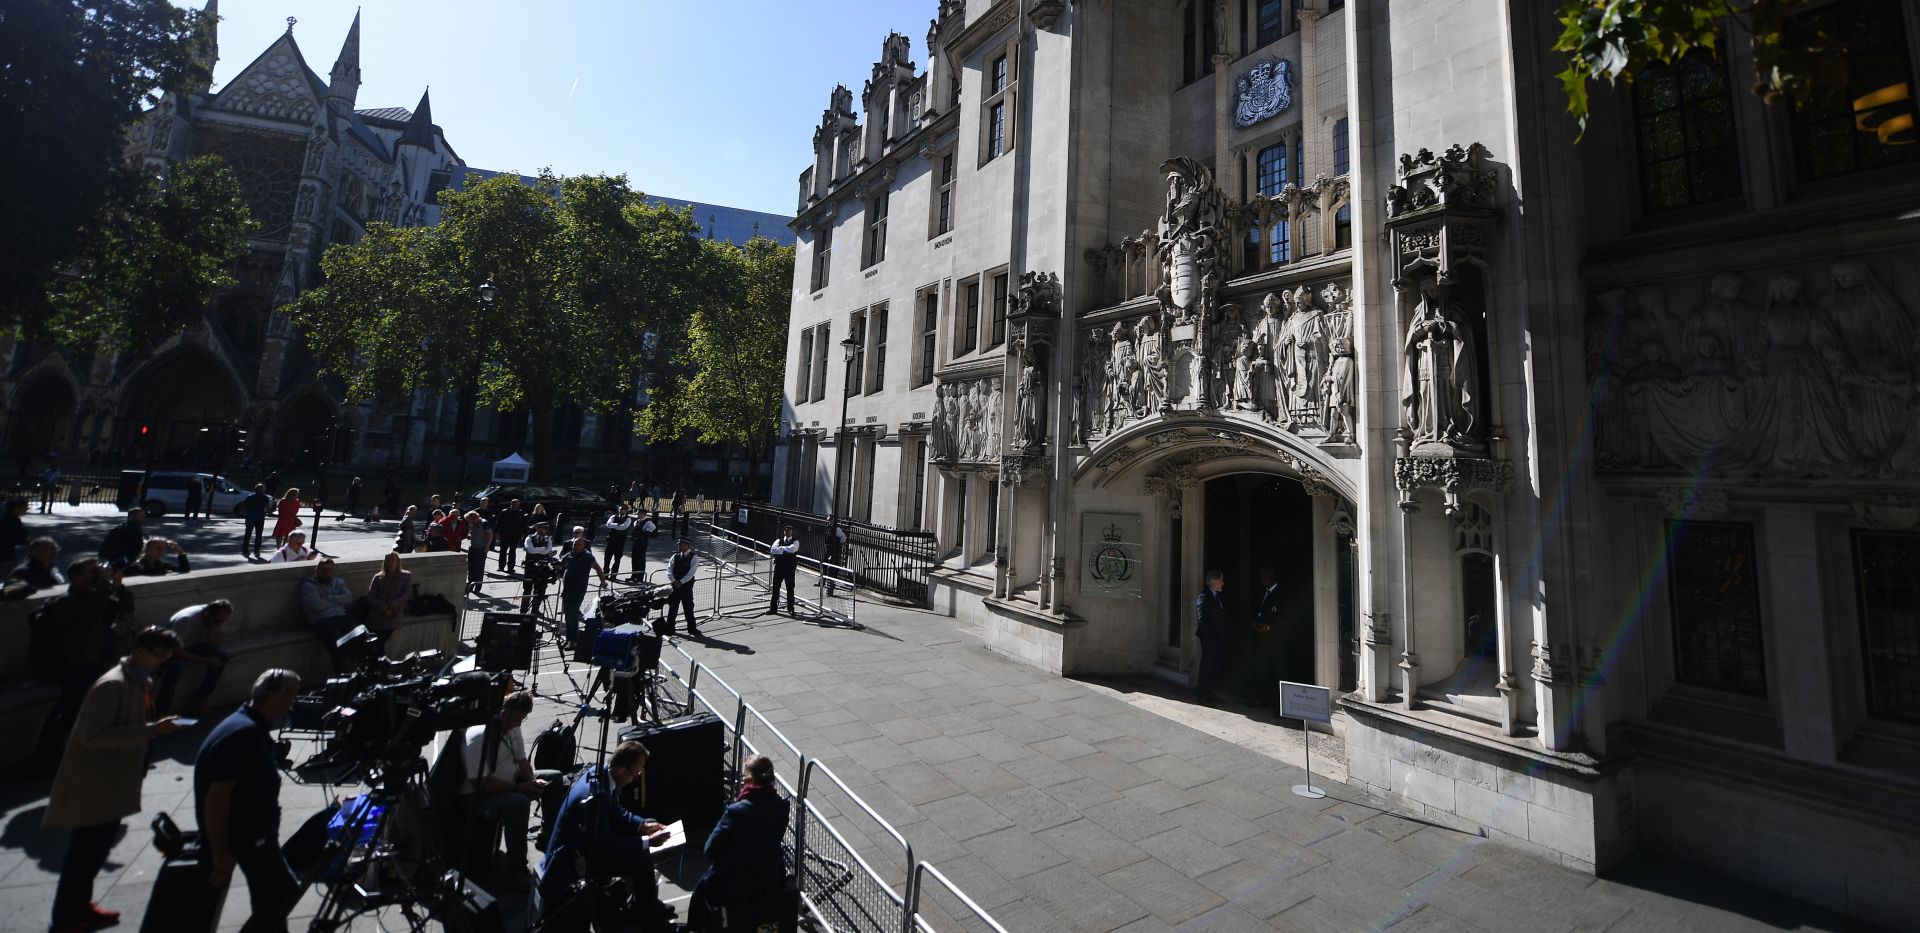 epa07850257 An exterior general view of the Supreme Court during a hearing on the prorogation of parliament, in London, Britain, 18 September 2019. The Supreme Court is due to rule on 19 September whether the suspension of parliament by British Prime Minister Boris Johnson was lawful.  EPA/ANDY RAIN